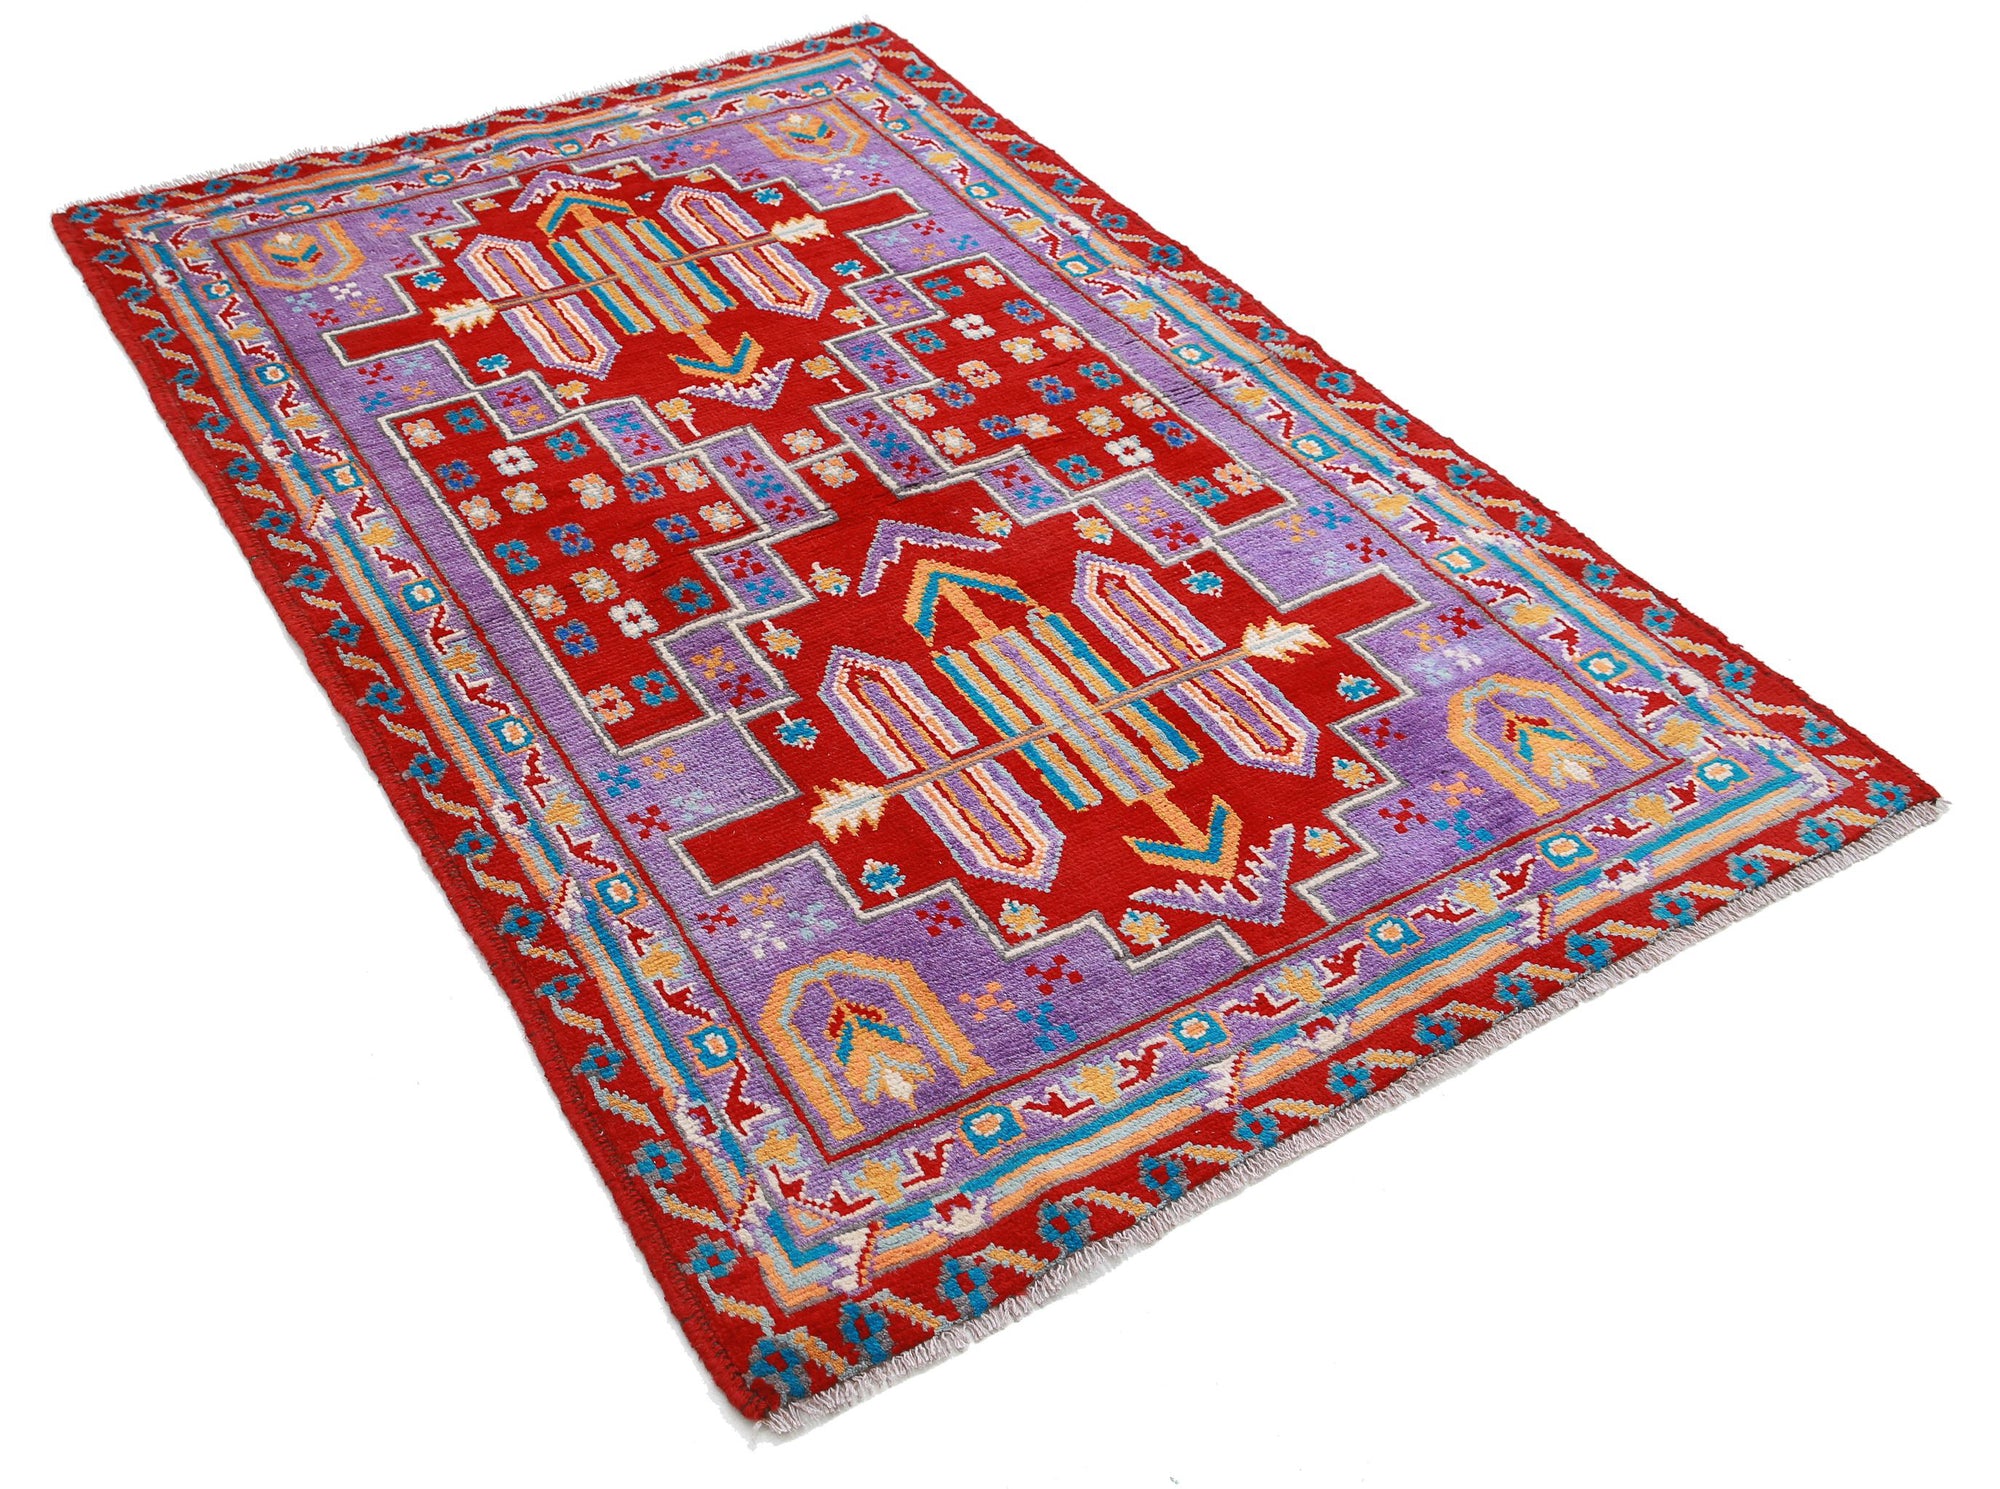 Revival-hand-knotted-qarghani-wool-rug-5014212-1.jpg